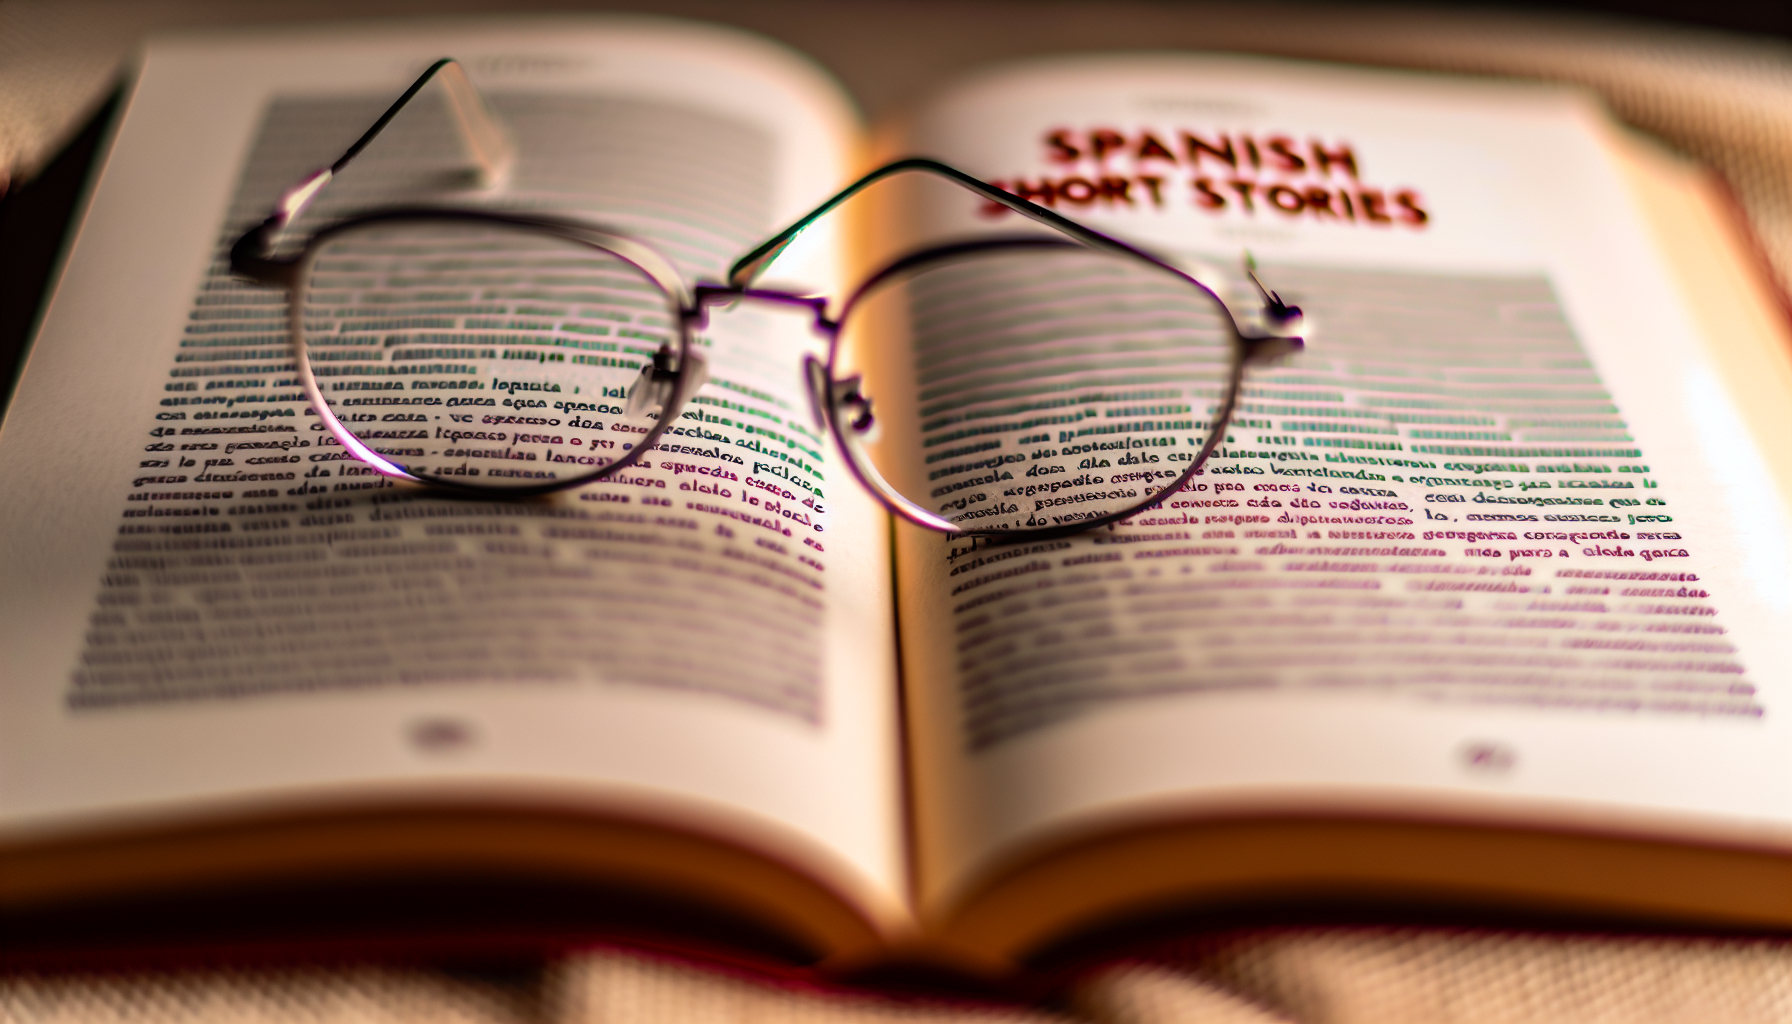 Photo of an open book with the title 'Spanish Short Stories' and a pair of glasses on top